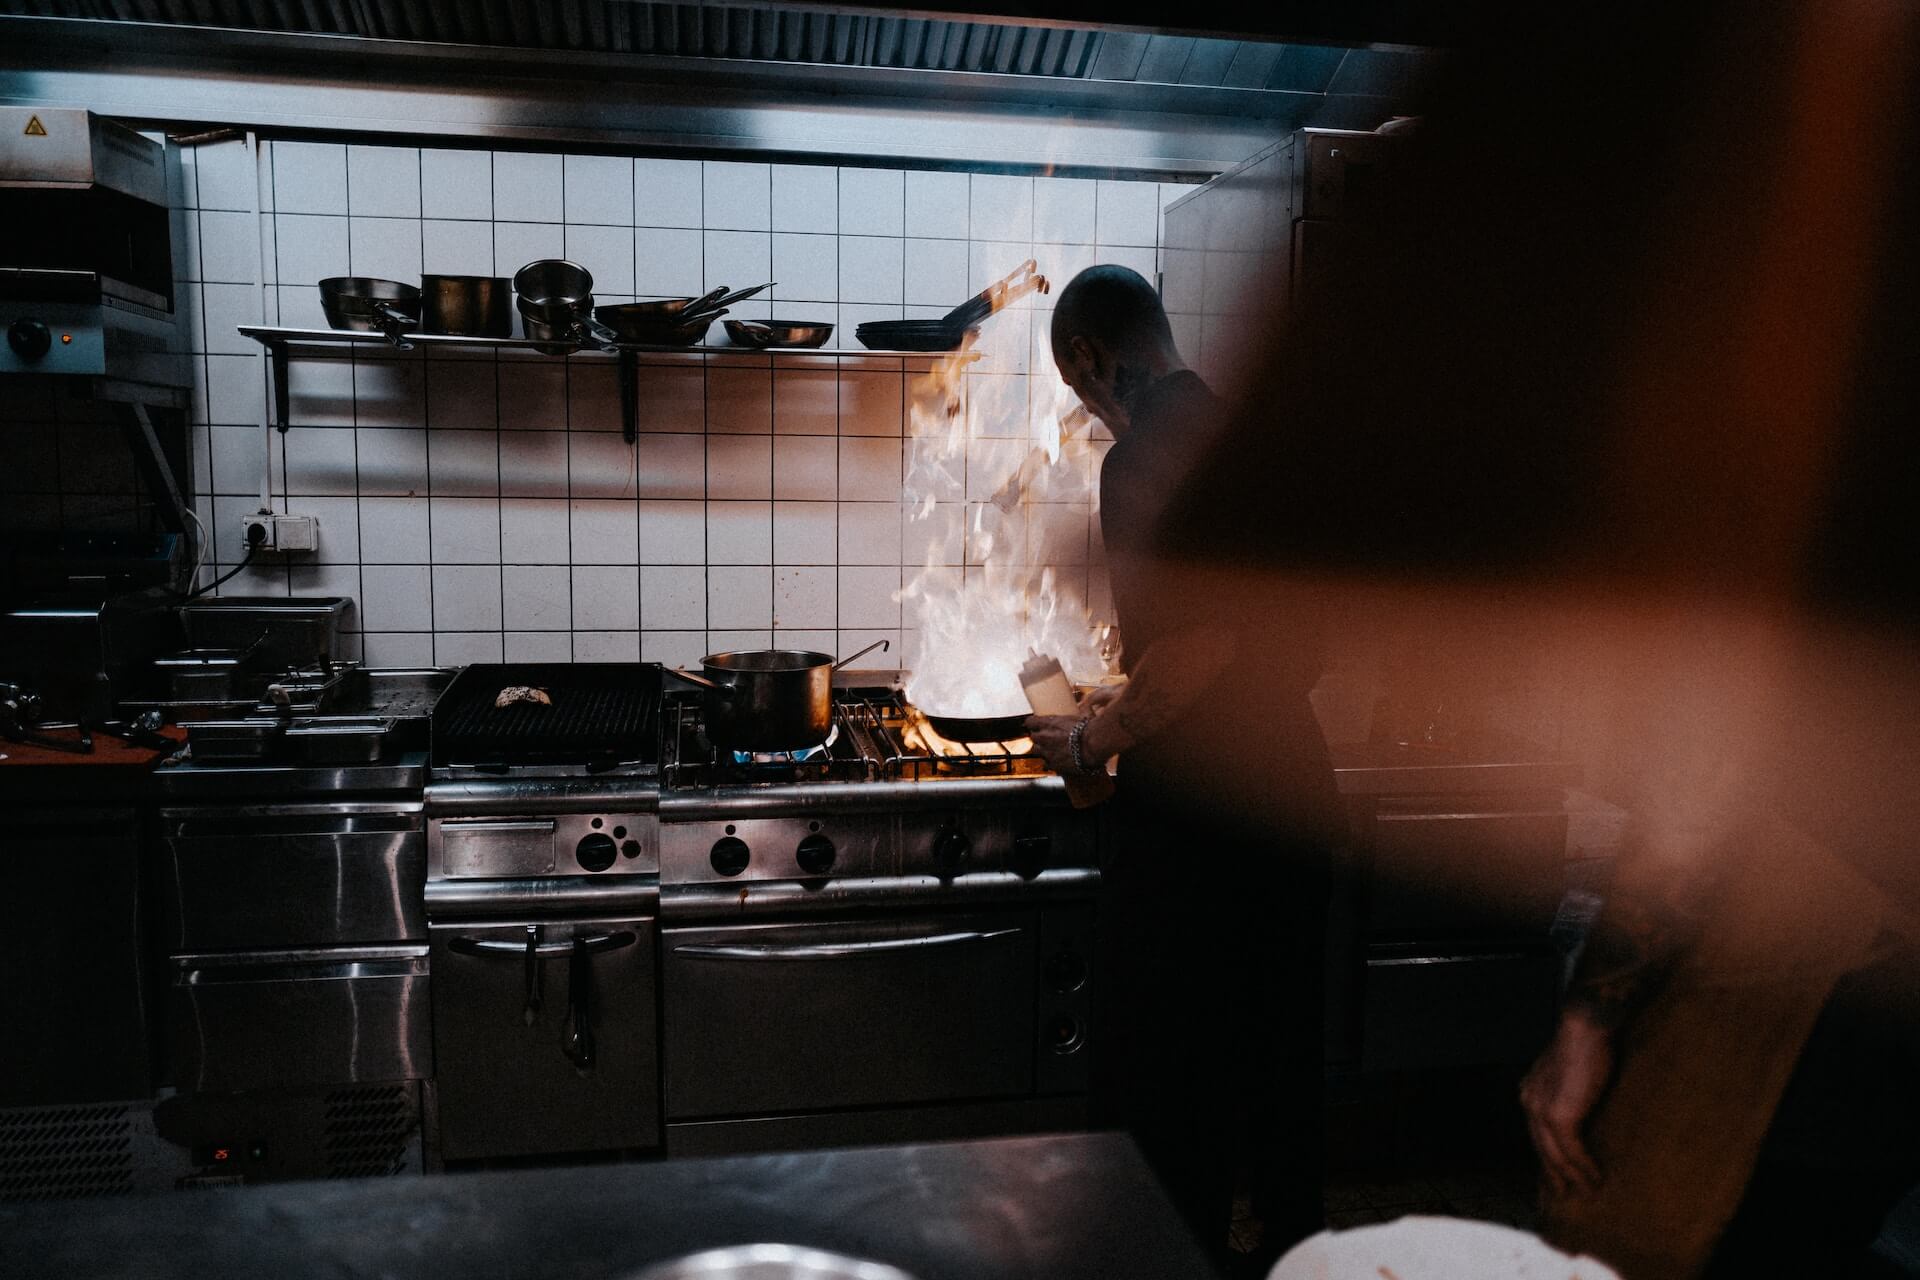 Chef handling flaming pan in commercial kitchen